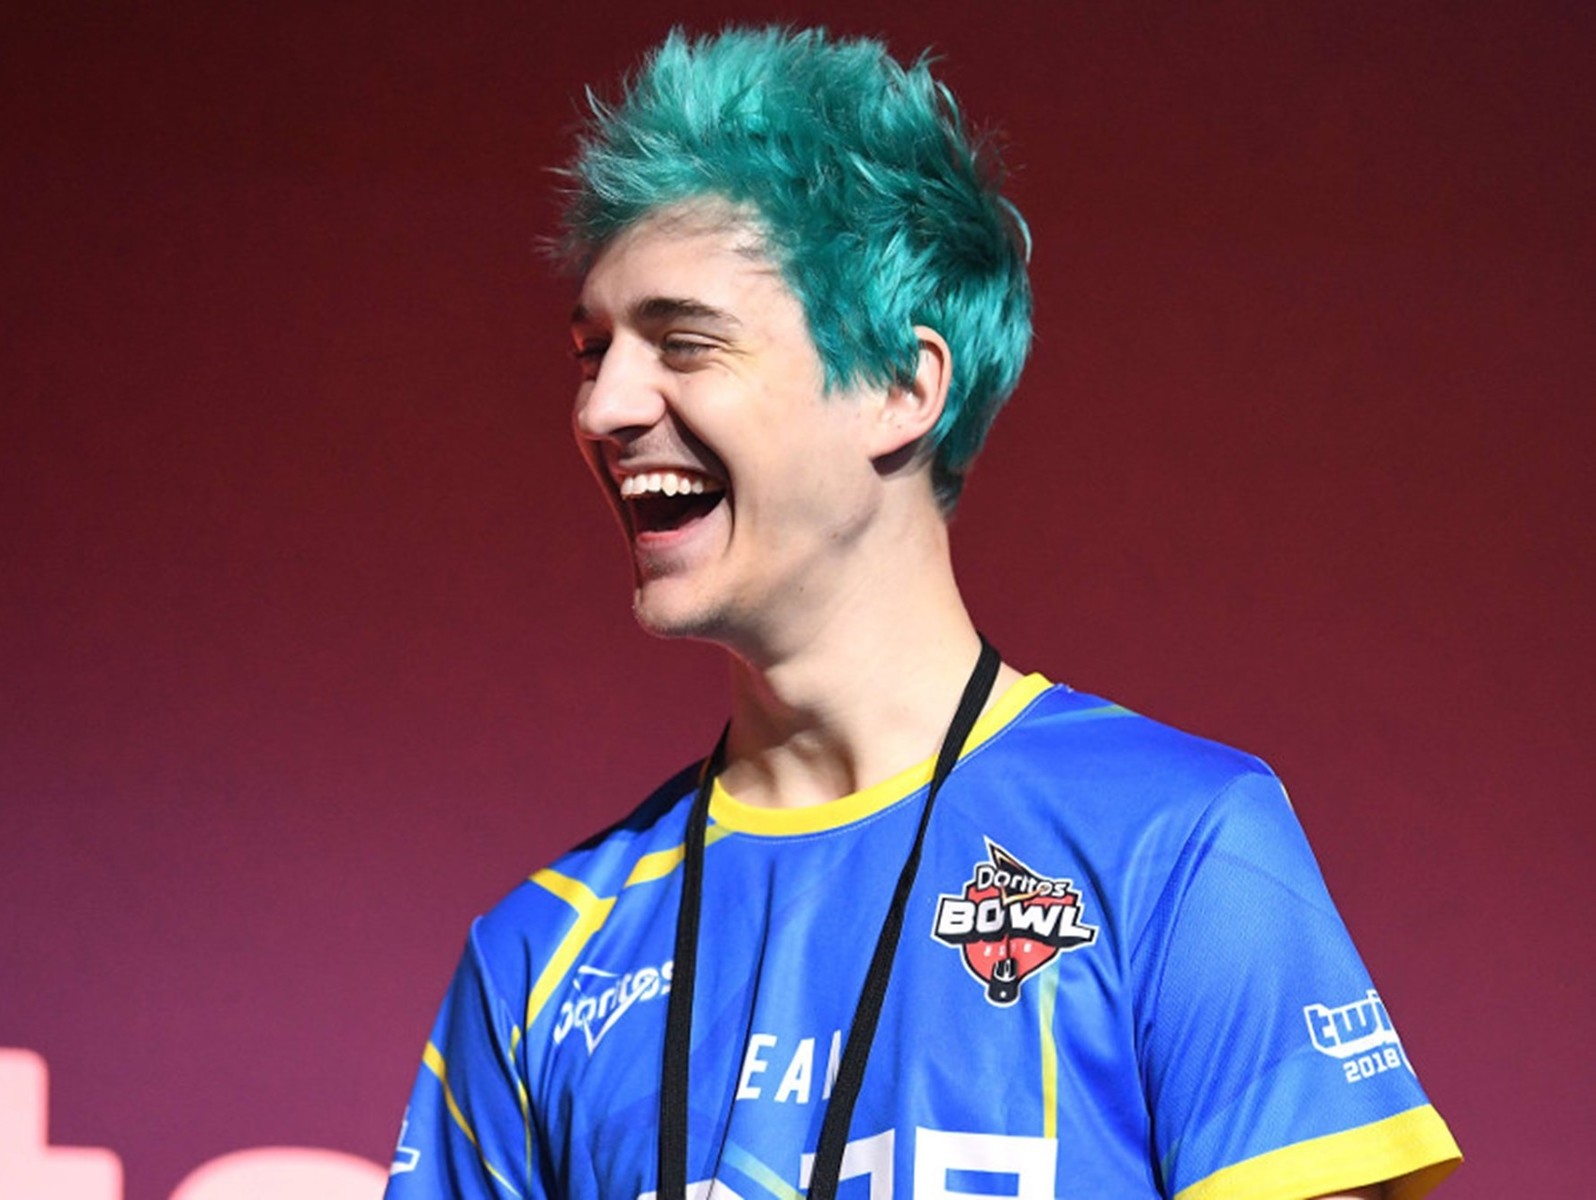 How much the popular Twitch Streamer “Ninja” made in 2018 ... - 1596 x 1200 jpeg 218kB